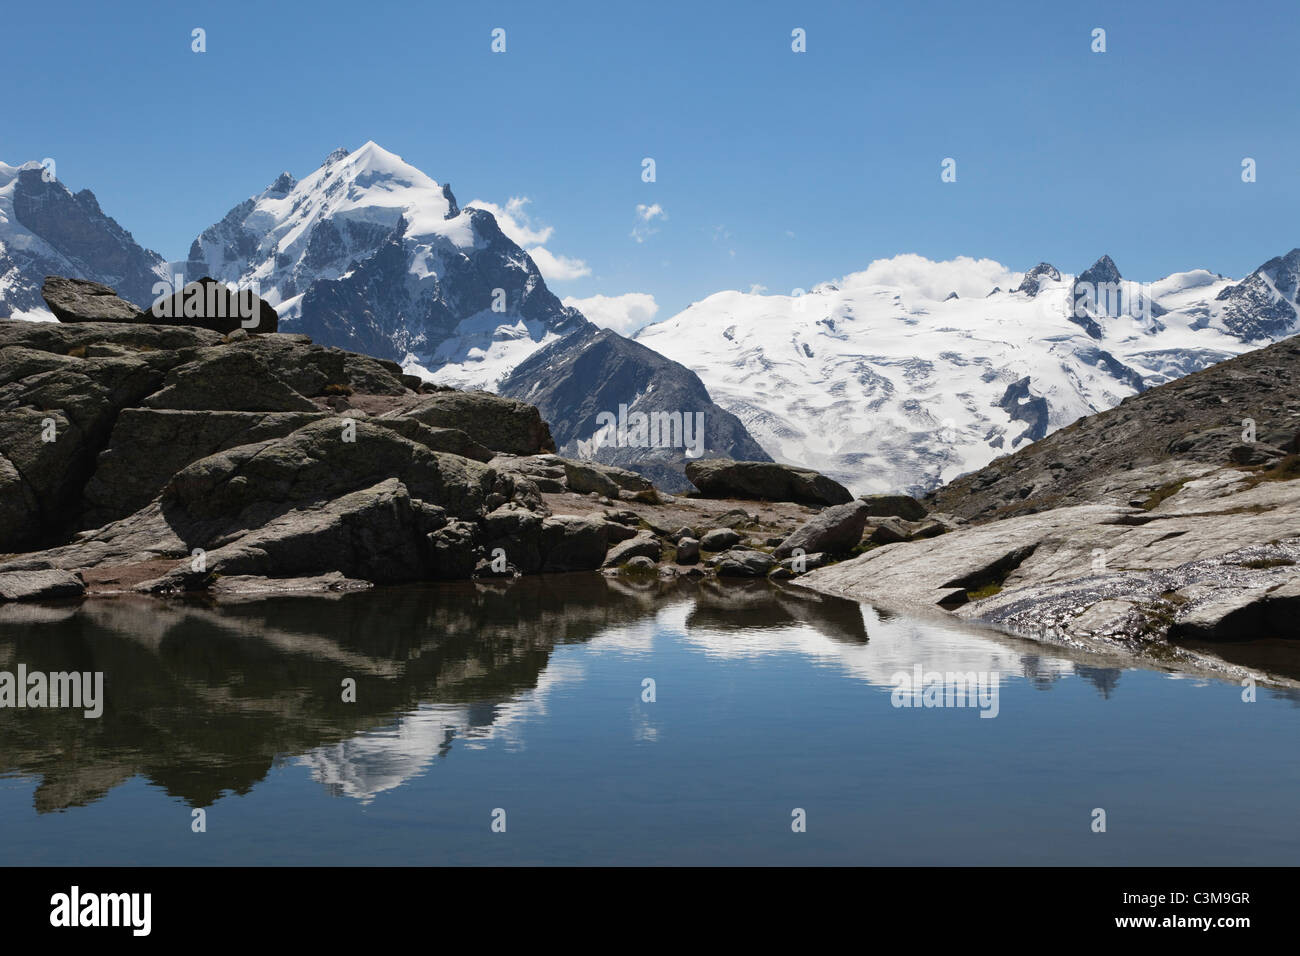 Europe, Switzerland, Grisons, South Engadin Alps, Upper Engadin, View of mountain peaks near Fuorcla Surley lake Stock Photo